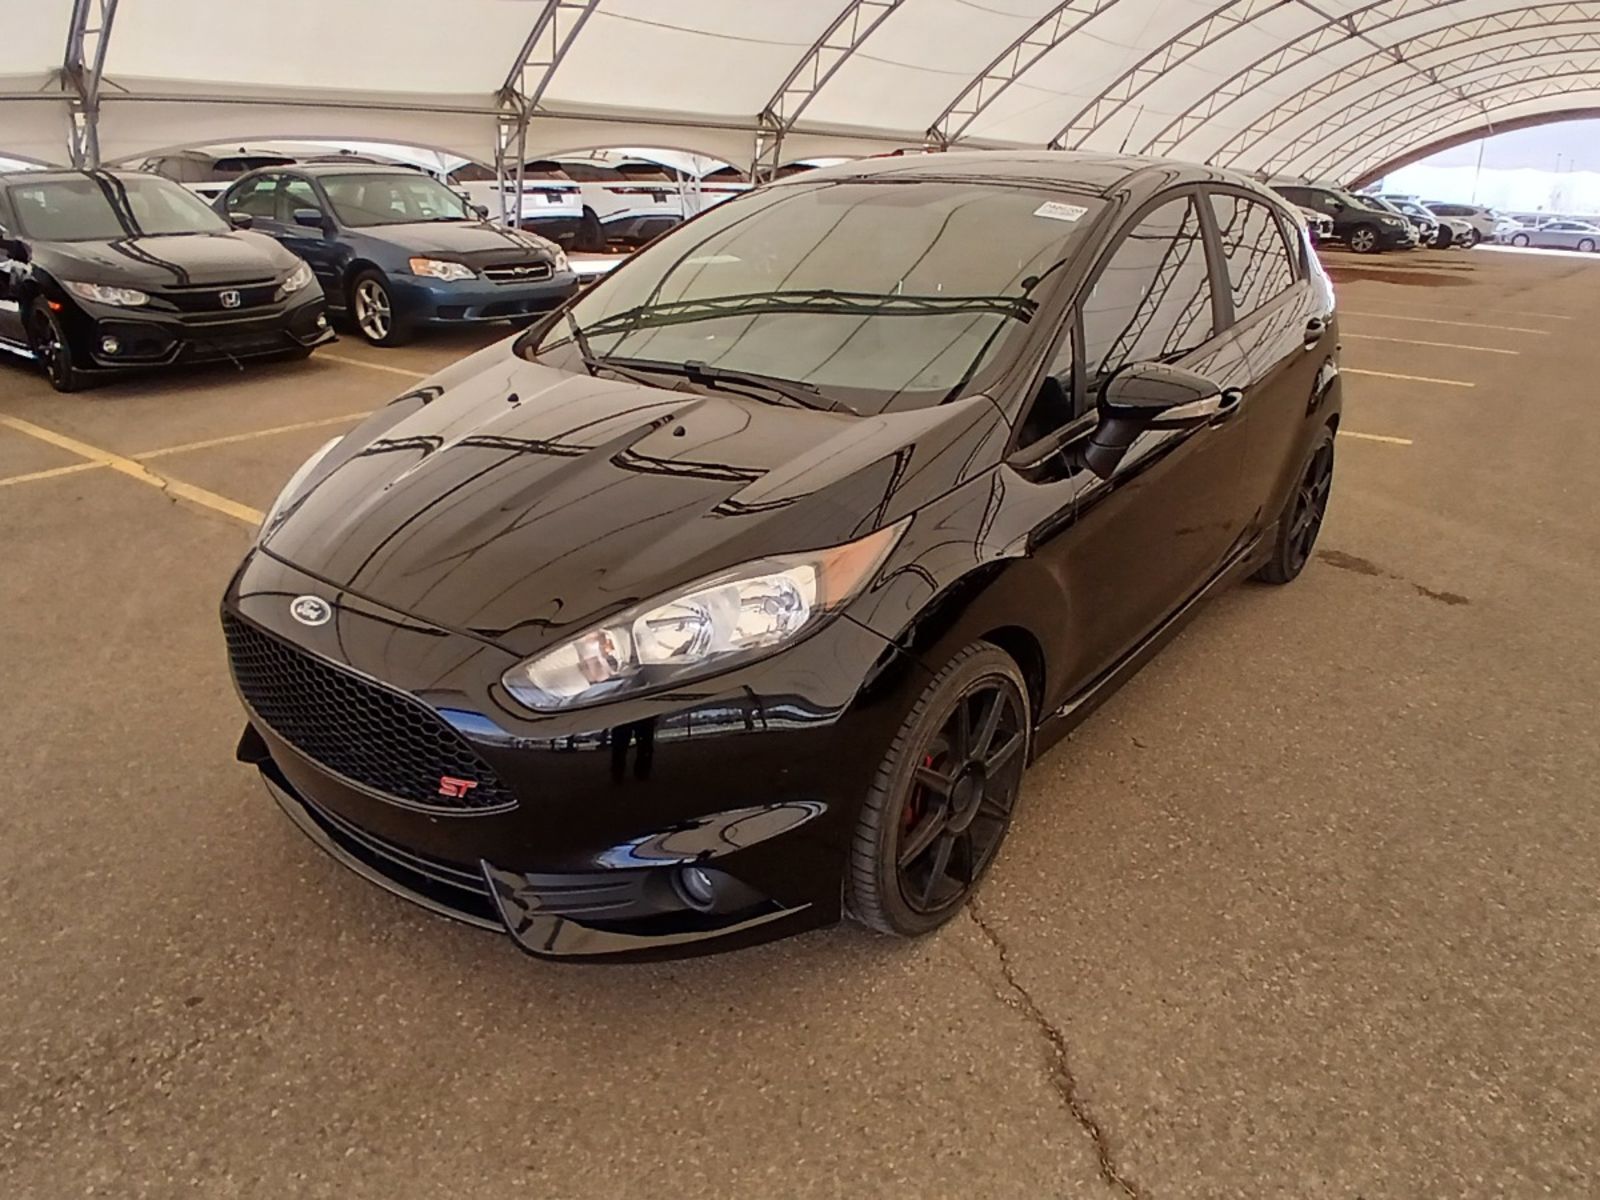 2017 Ford Fiesta ST - No Accidents, One Owner, Heated Seats